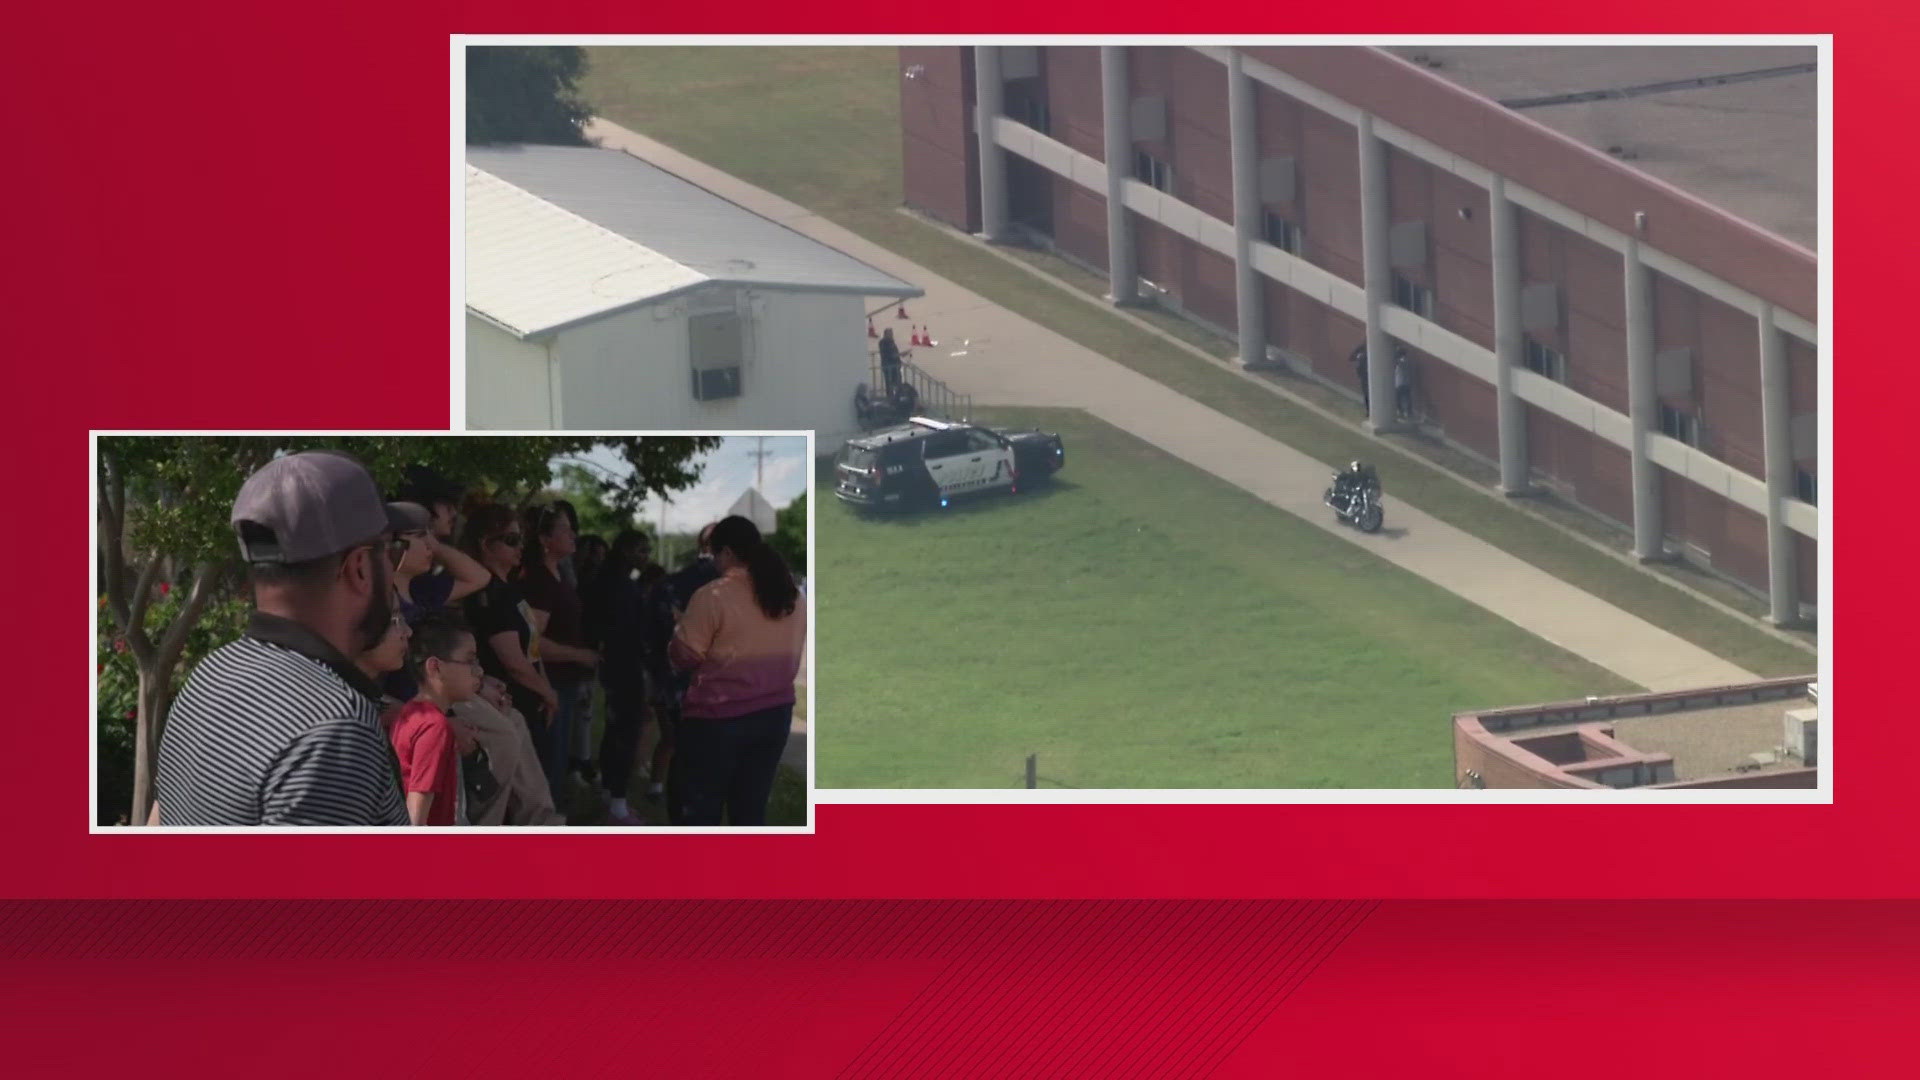 Bowie High School was on lockdown Wednesday due to an on-campus shooting outside of the school building